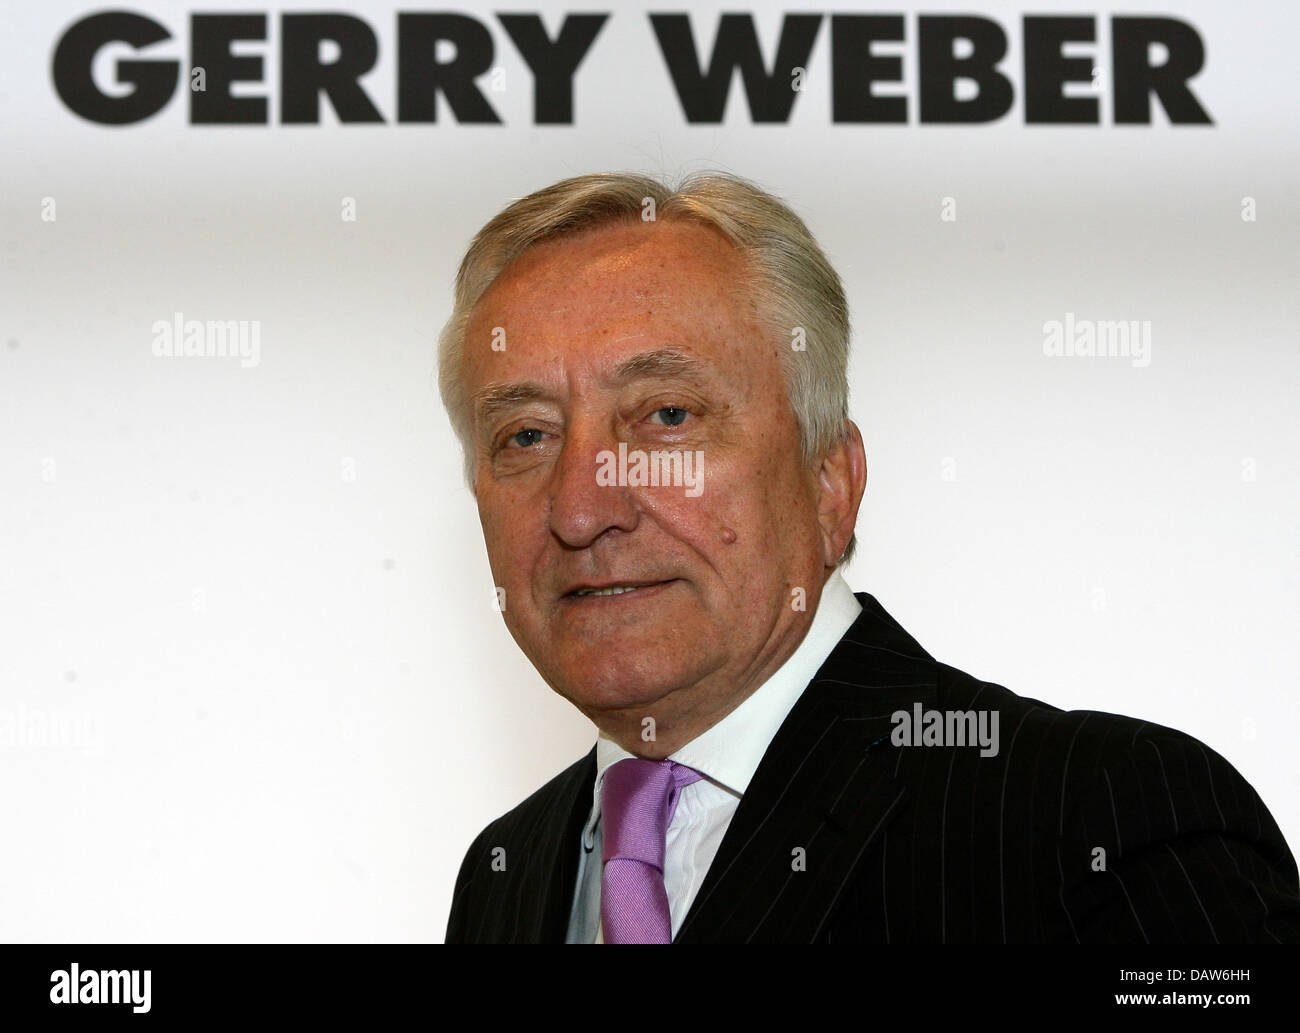 Gerhard weber hi-res stock photography and images - Alamy